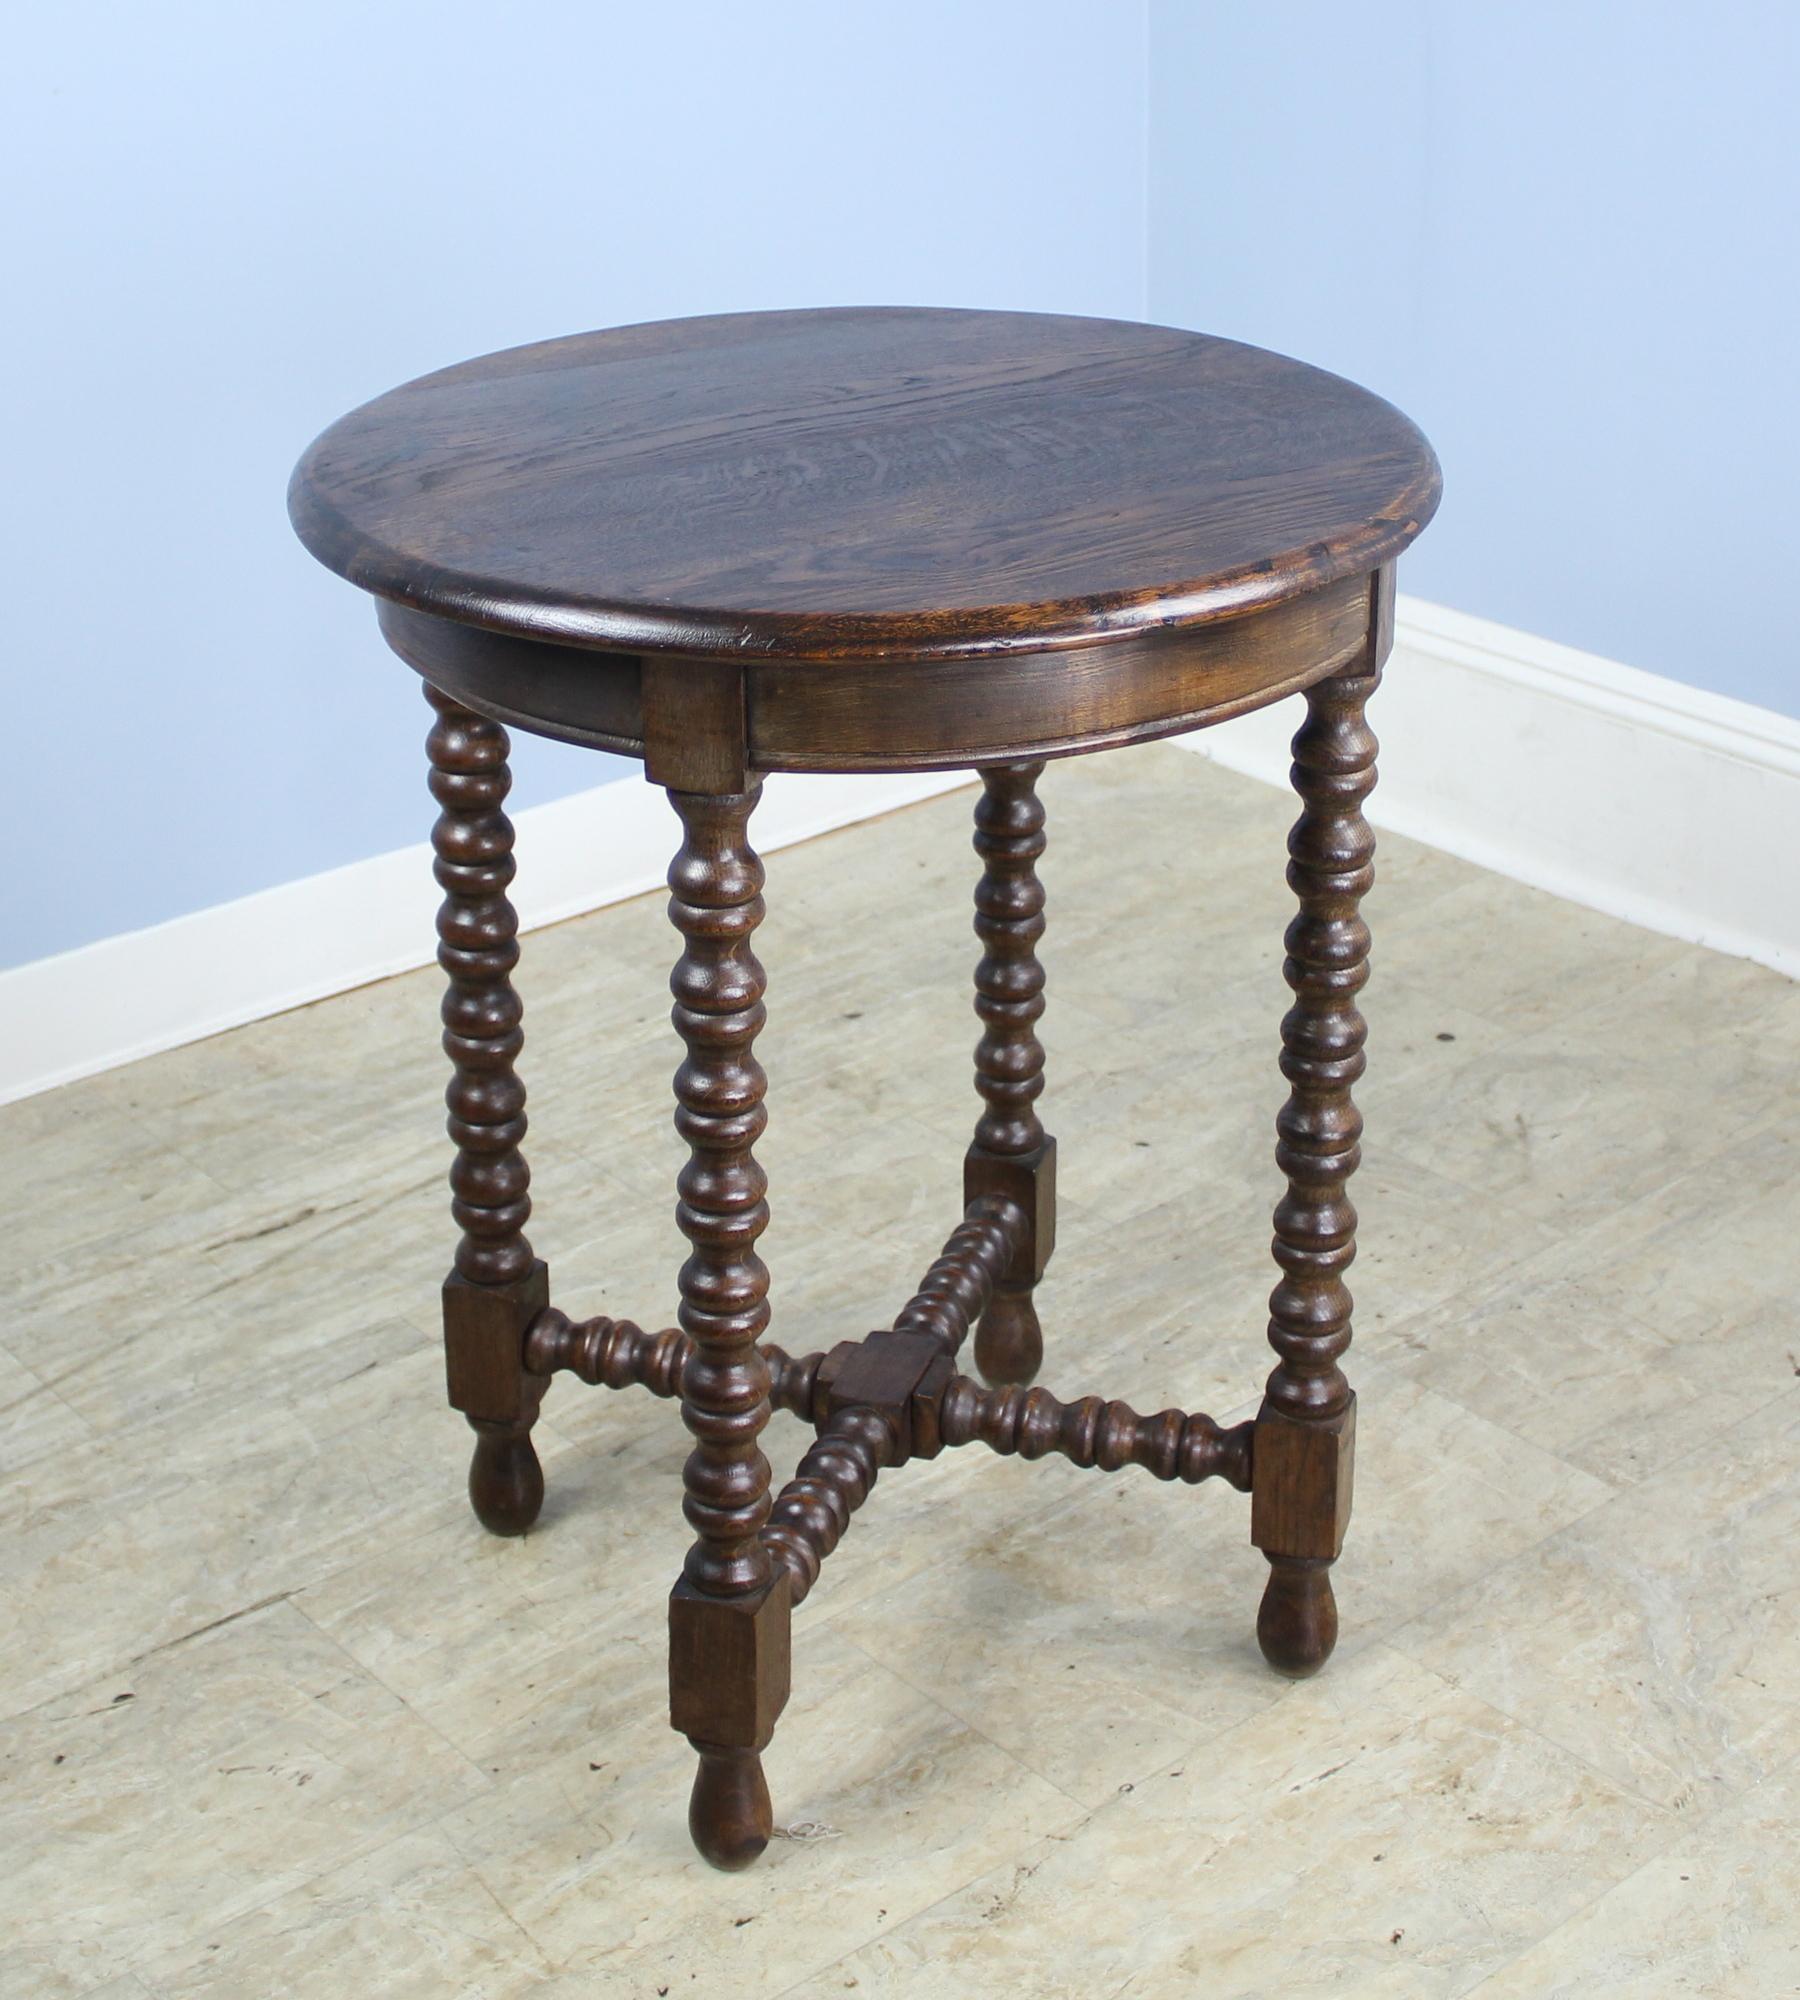 A round bobbin legged side table in rich dark brown oak. Criss-cross stretcher base adds to the look. In excellent sturdy antique condition.